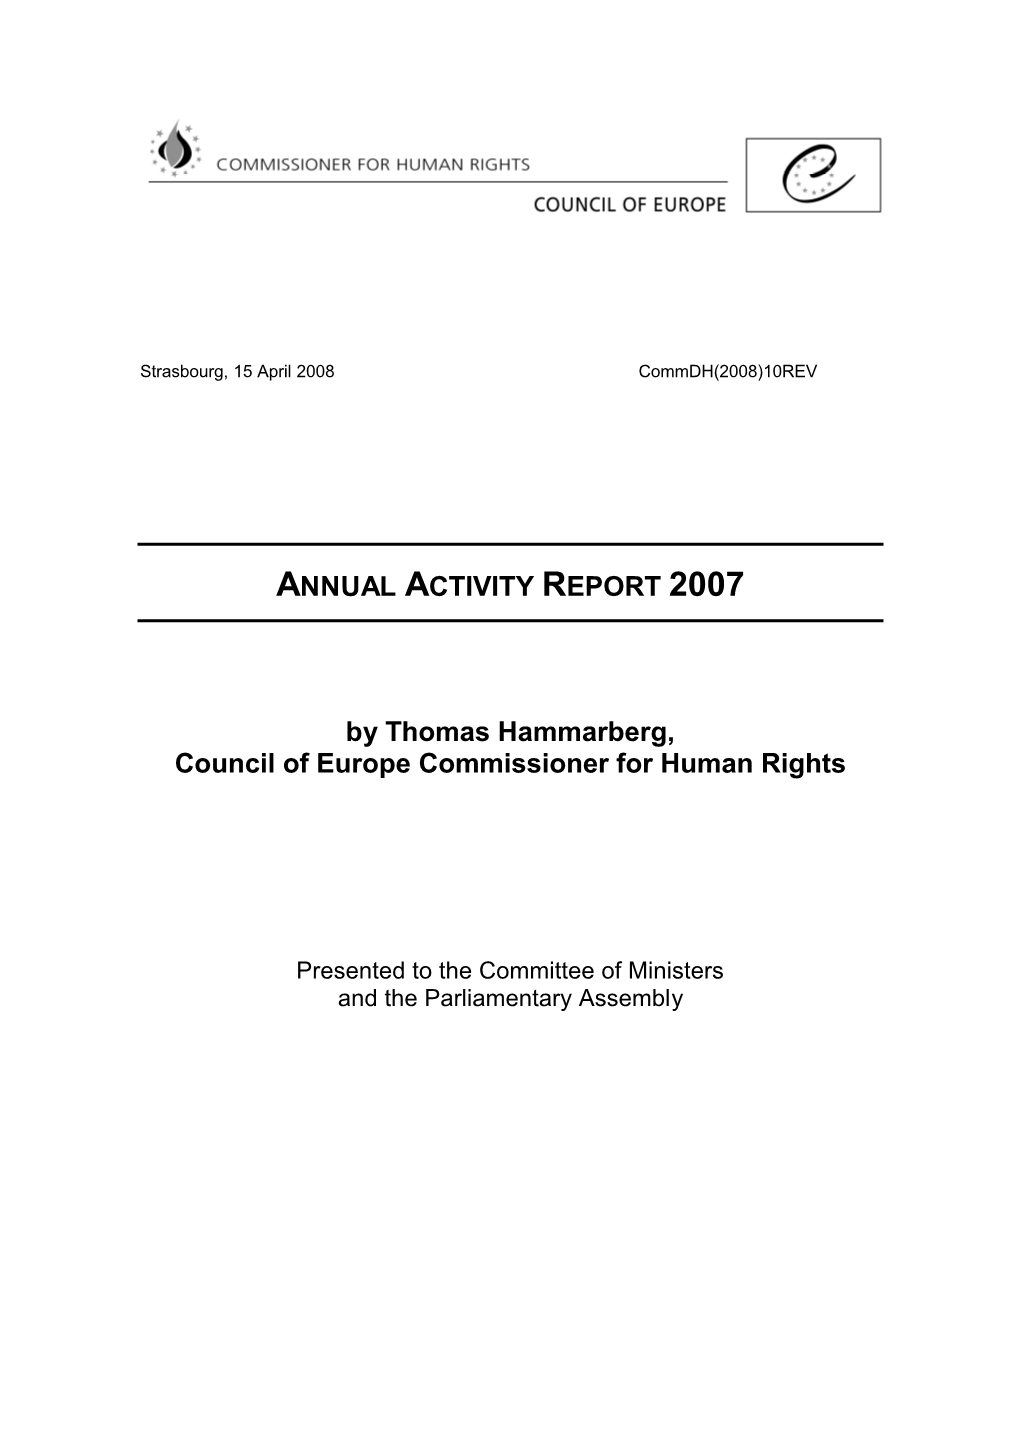 ANNUAL ACTIVITY REPORT 2007 by Thomas Hammarberg, Council Of